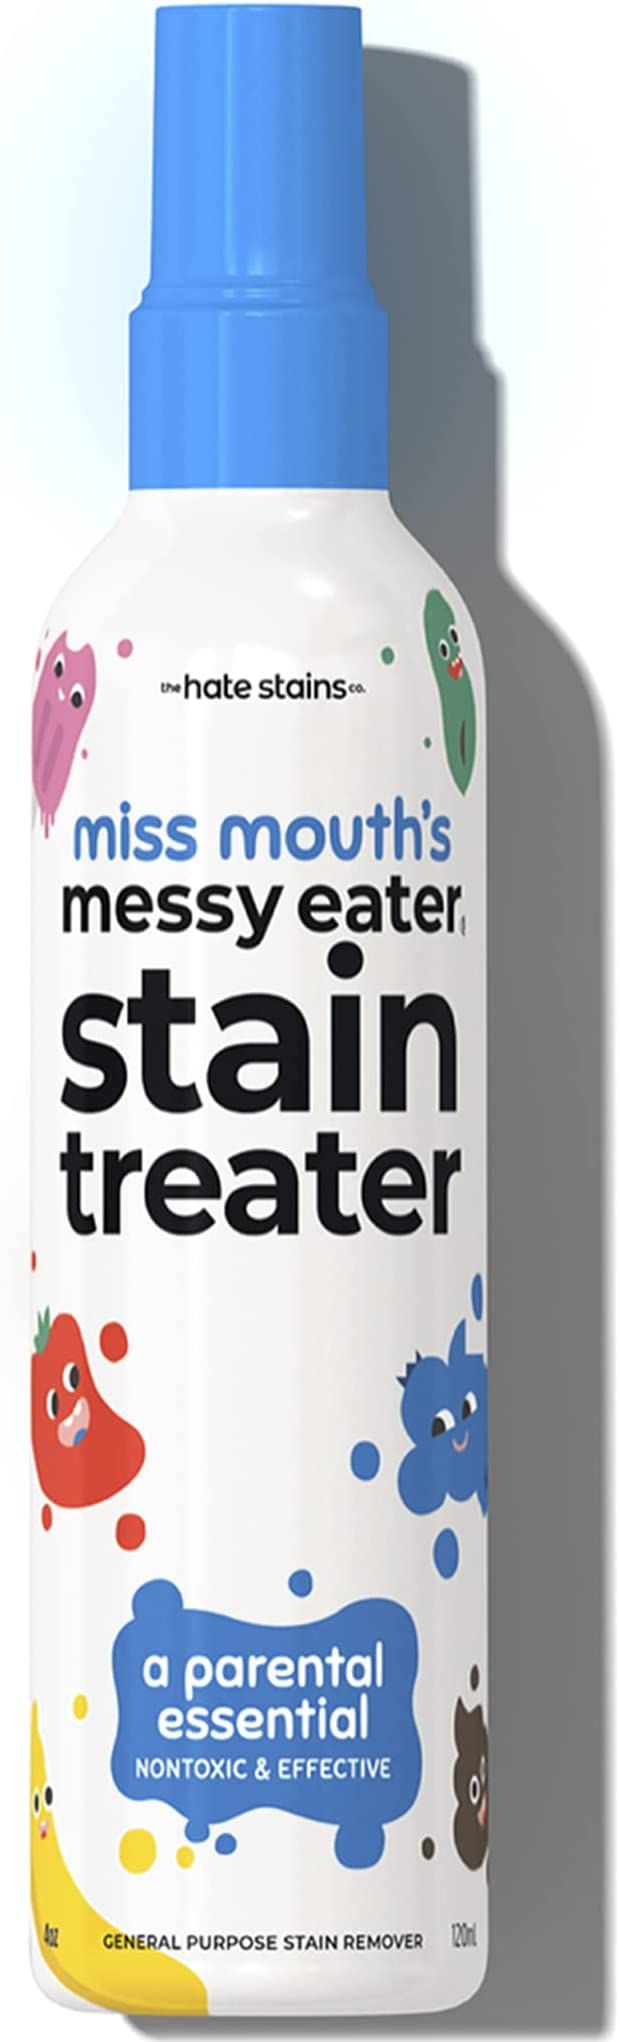 HATE STAINS CO Stain Remover for Clothes - 4oz Newborn Essentials for Purse - Miss Mouth's Messy ... | Amazon (US)